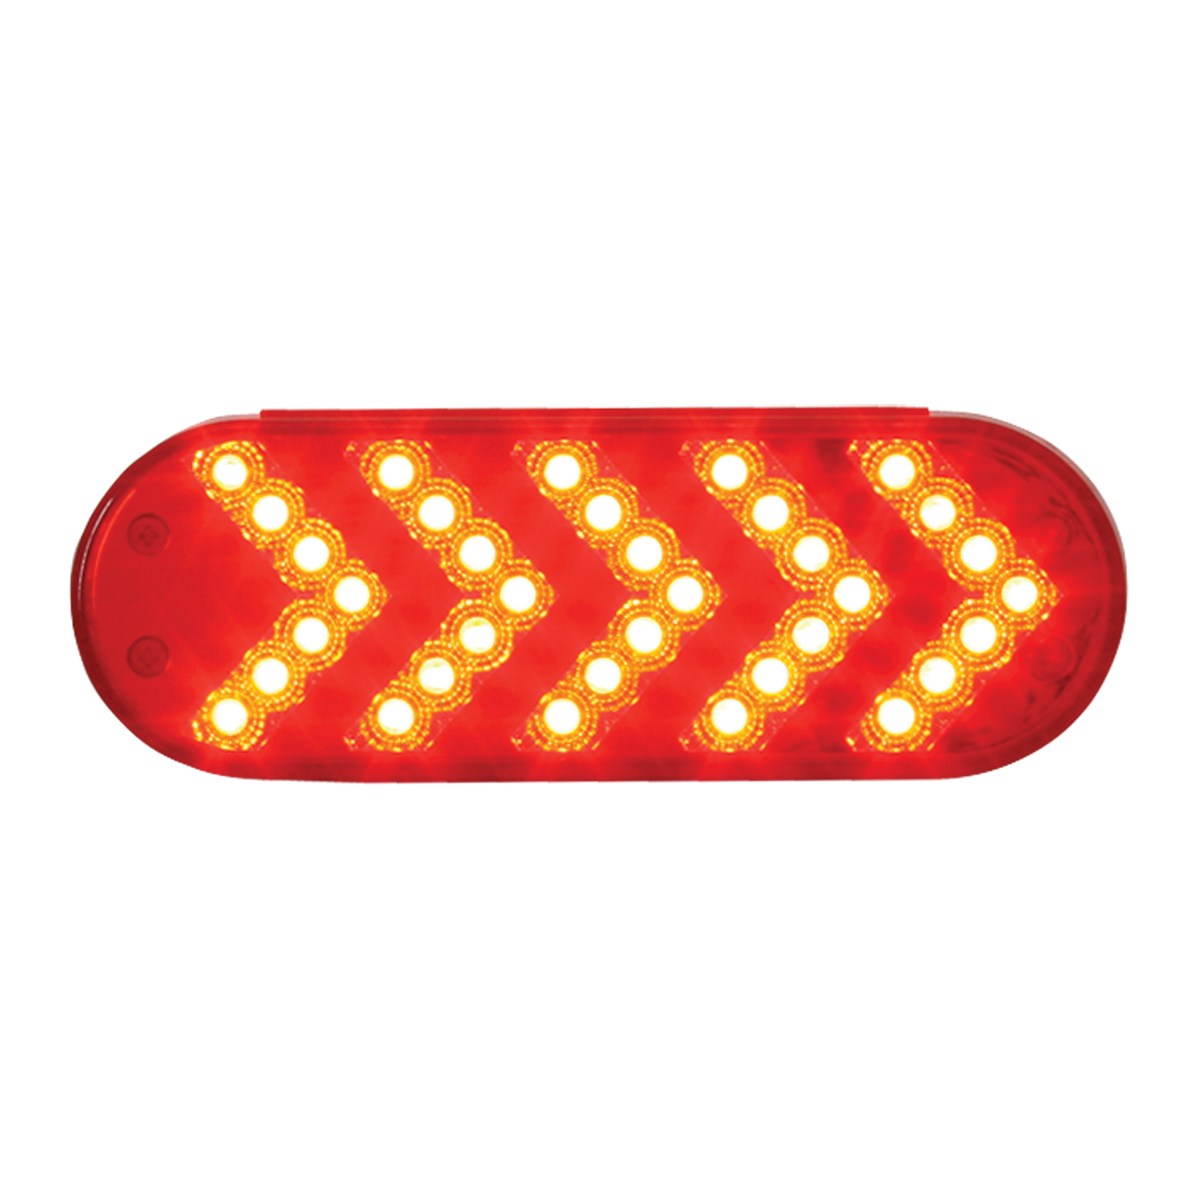 OVAL SEQUENTIAL ARROW MID-TURN SPYDER LED LIGHT